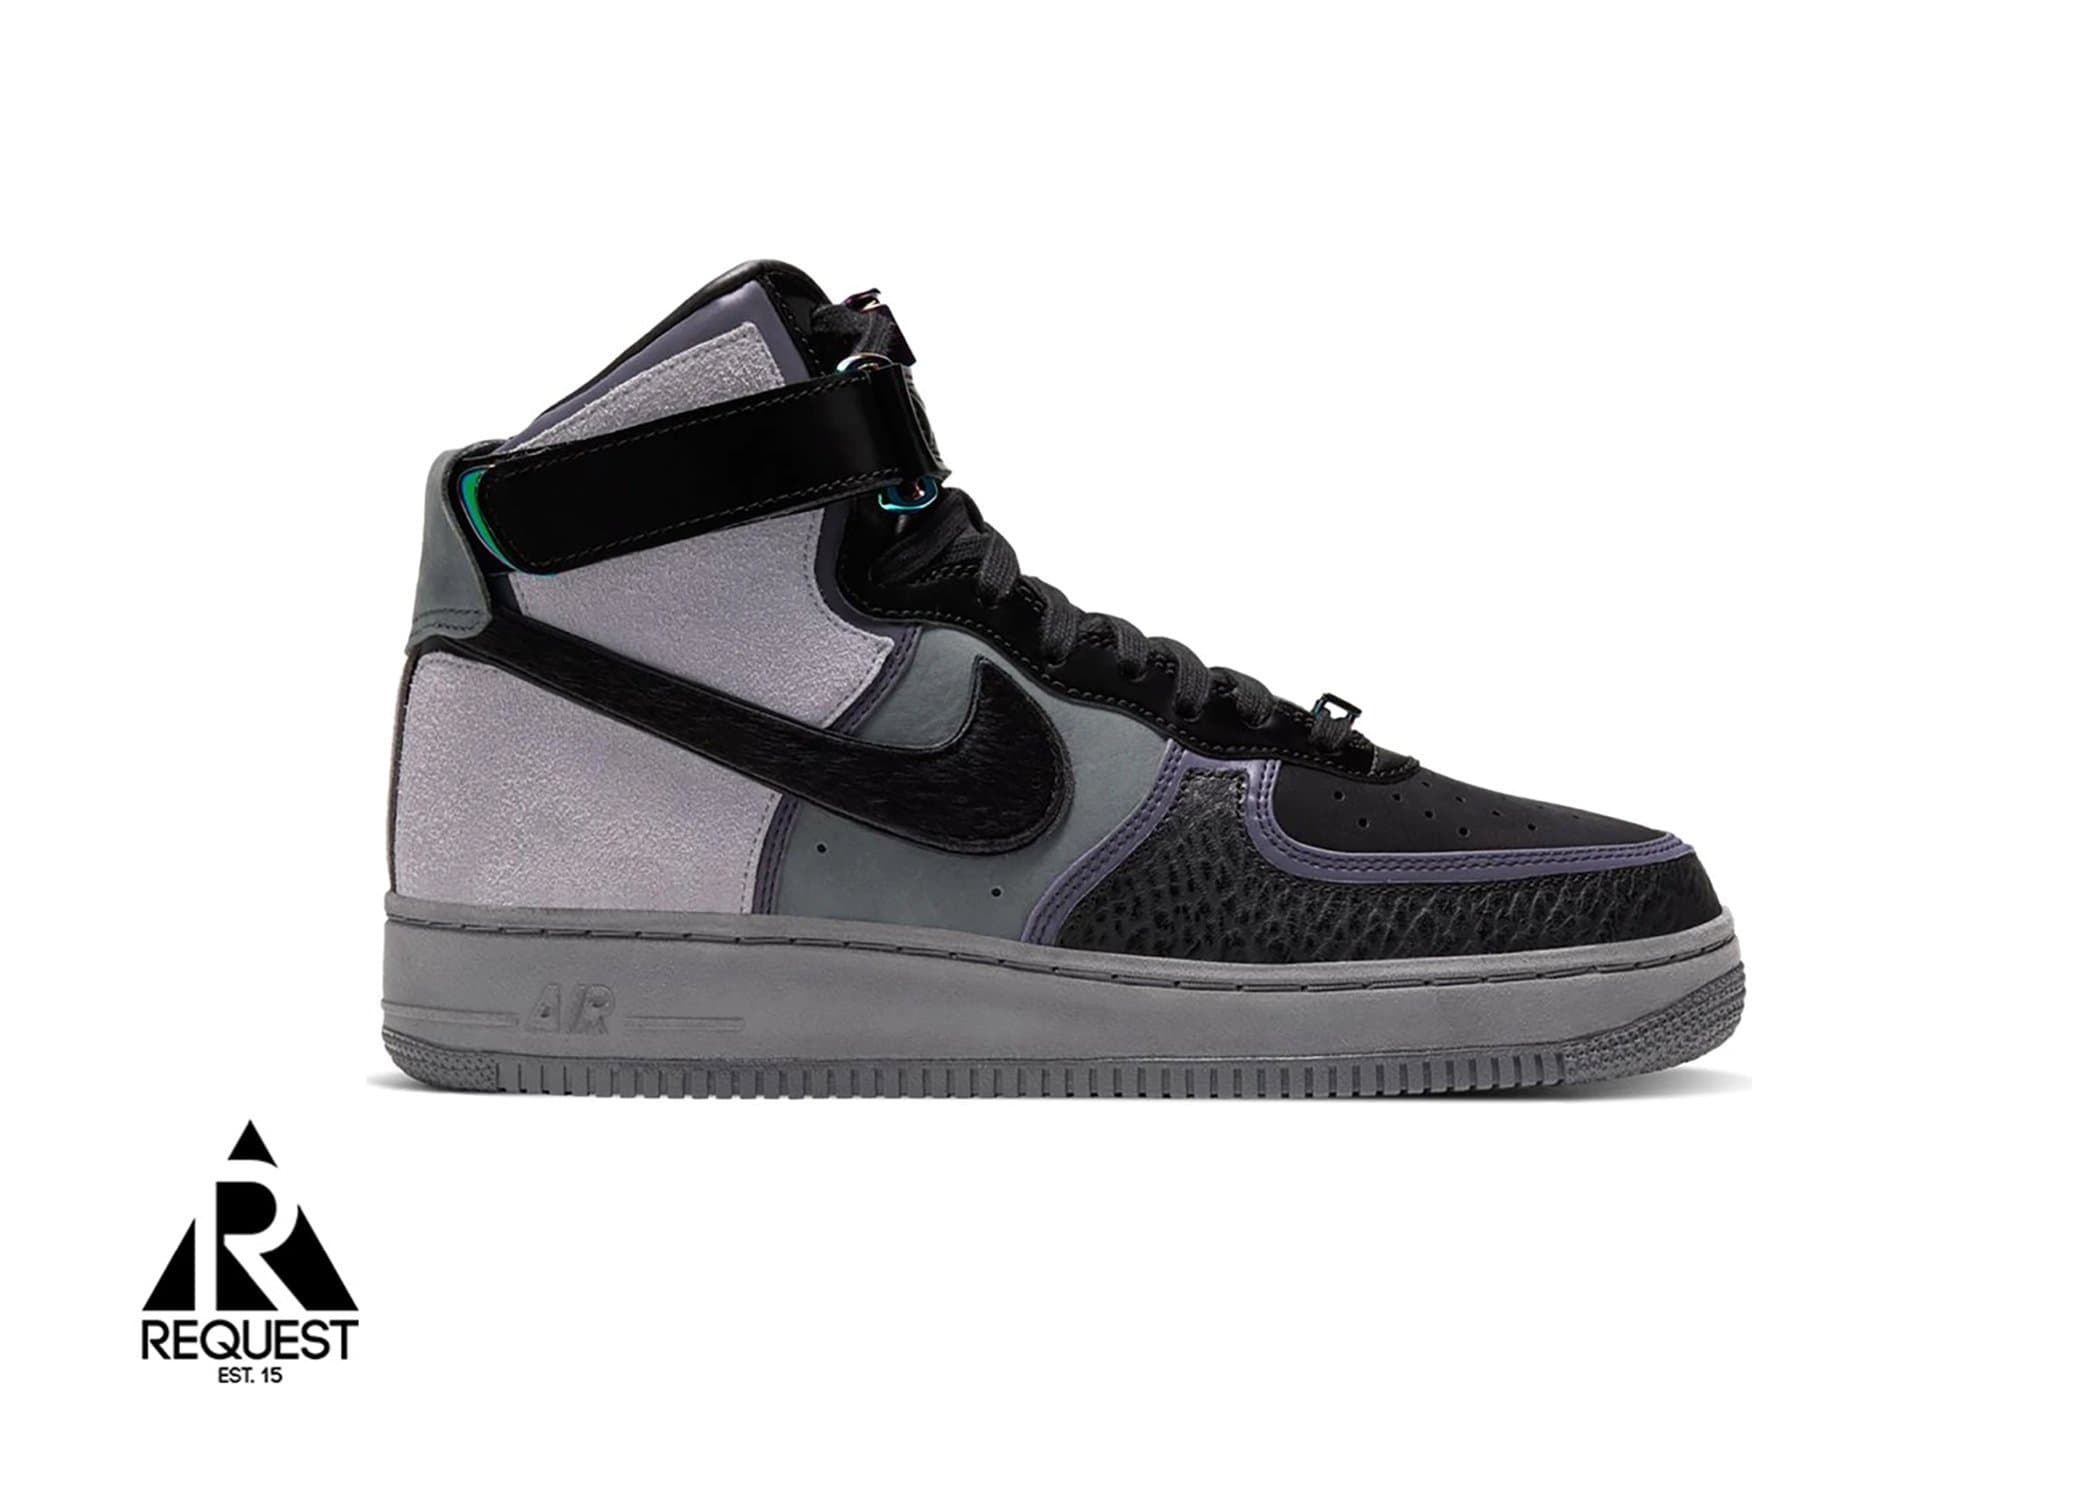 Revolutionair bouw Dempsey Air Force 1 High “A Ma Maniere Hand Wash Cold” | Request